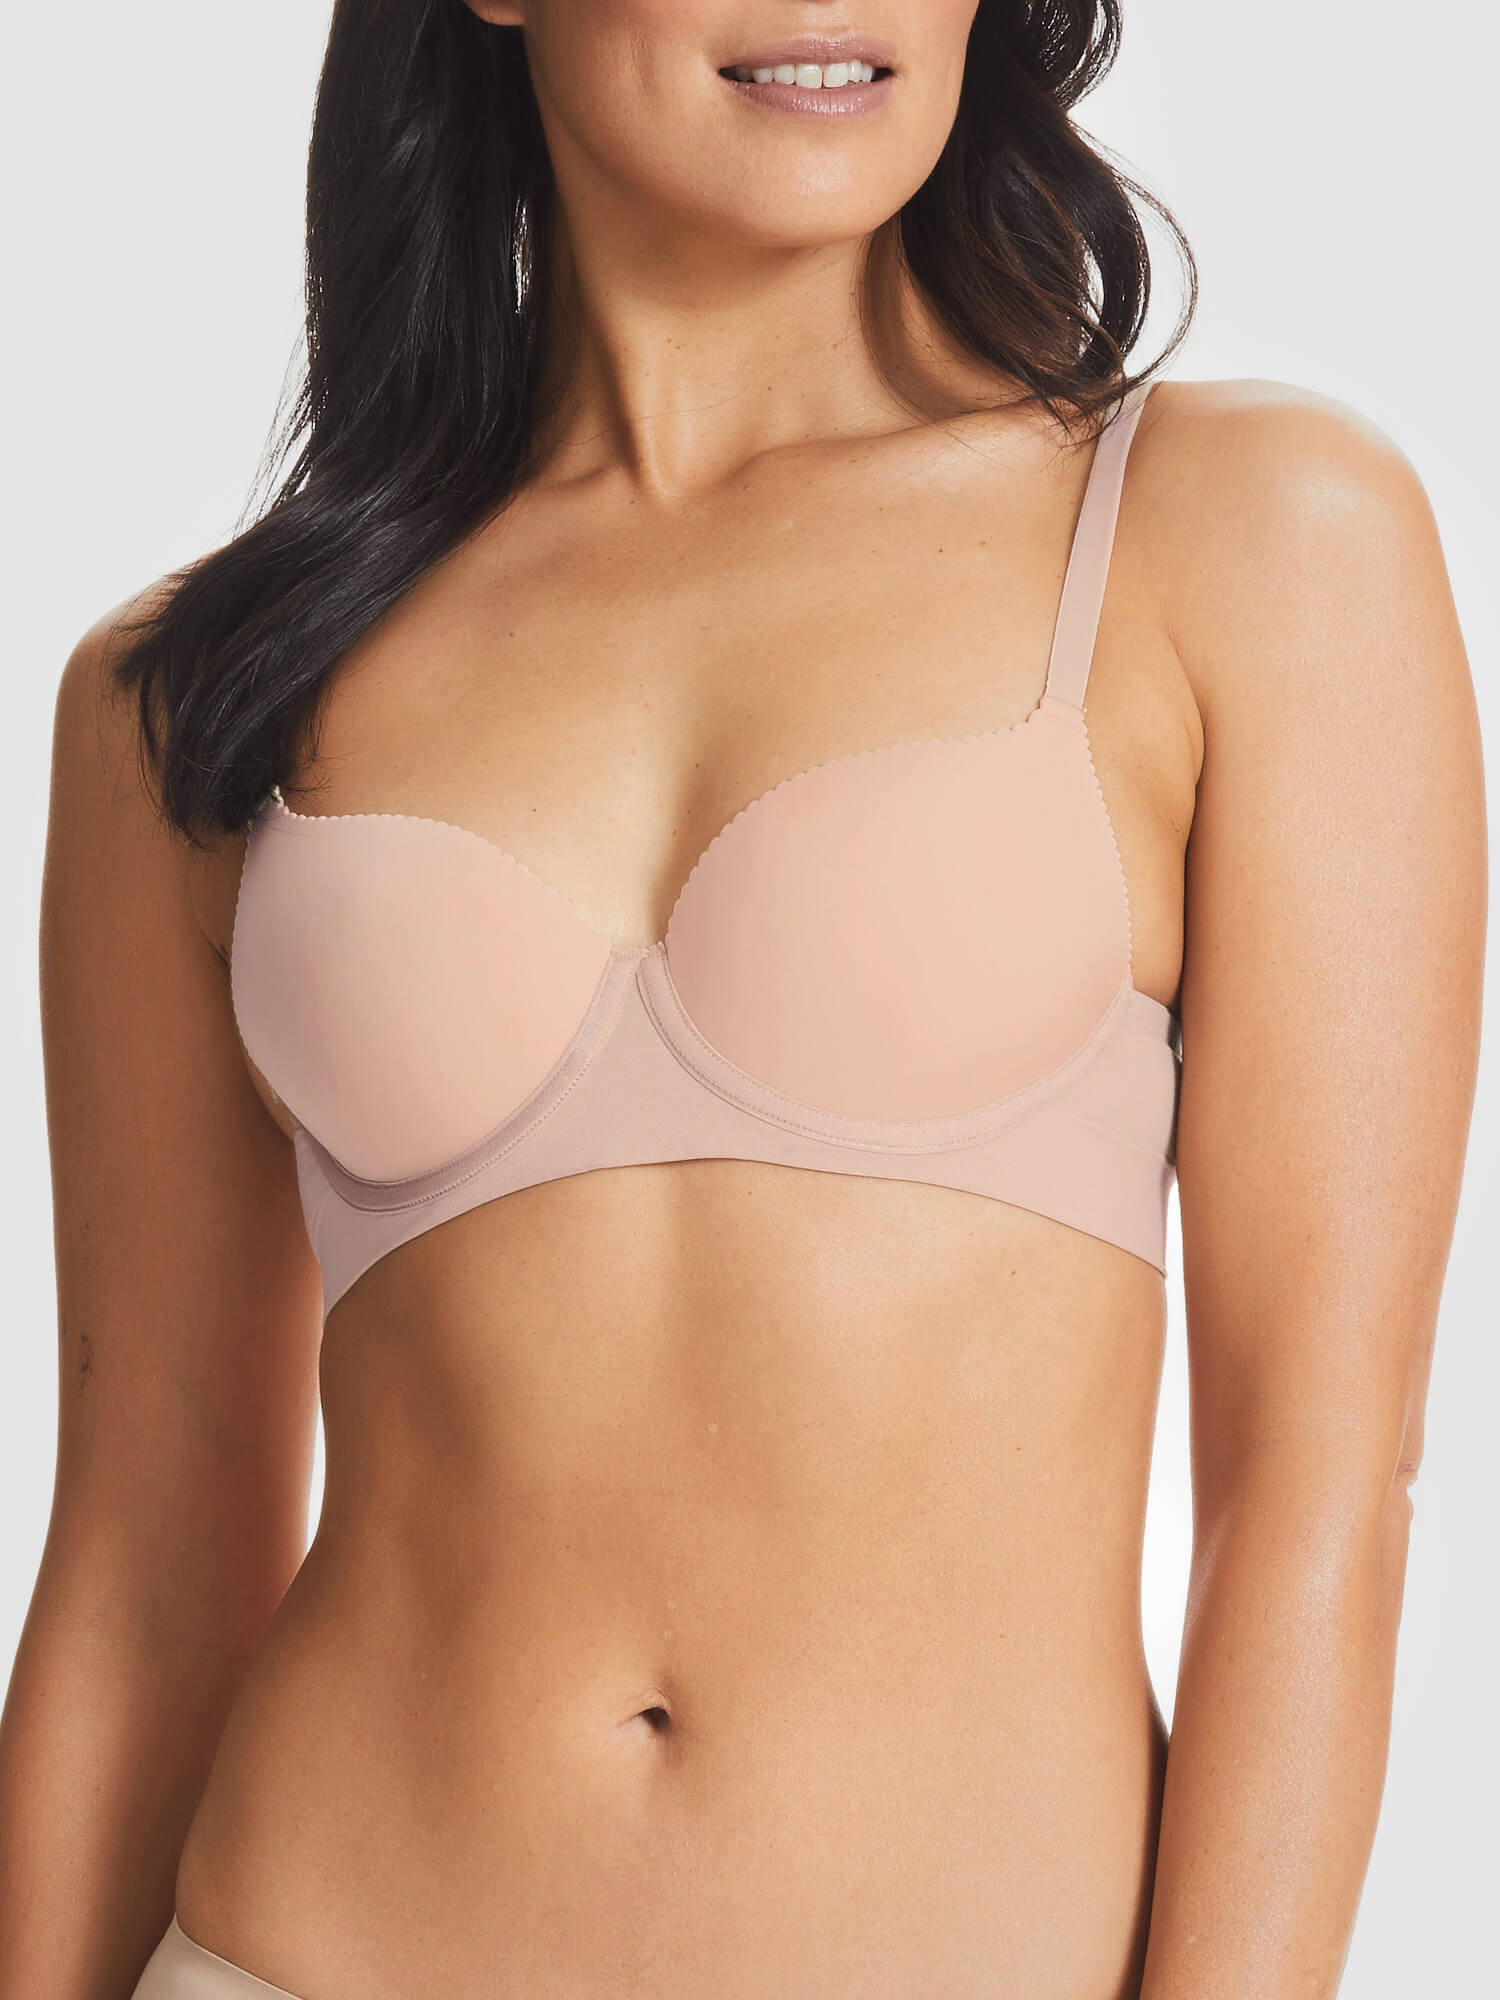 Why do my sister's breasts look bigger than mine, when her bra size is  smaller? - Quora